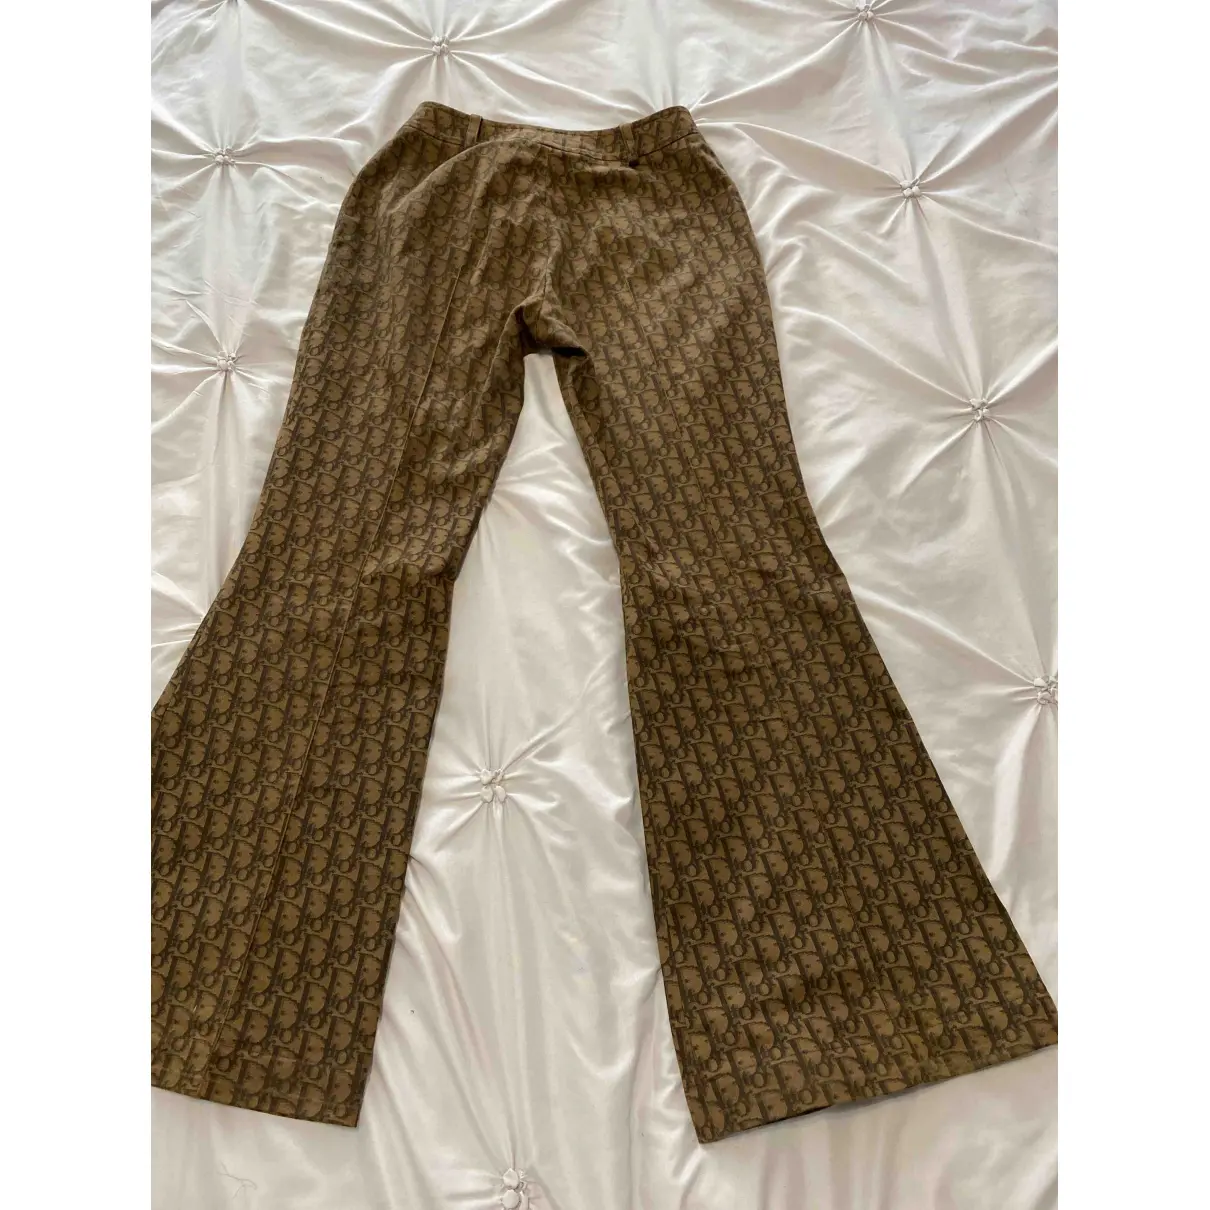 Buy Dior Cloth trousers online - Vintage